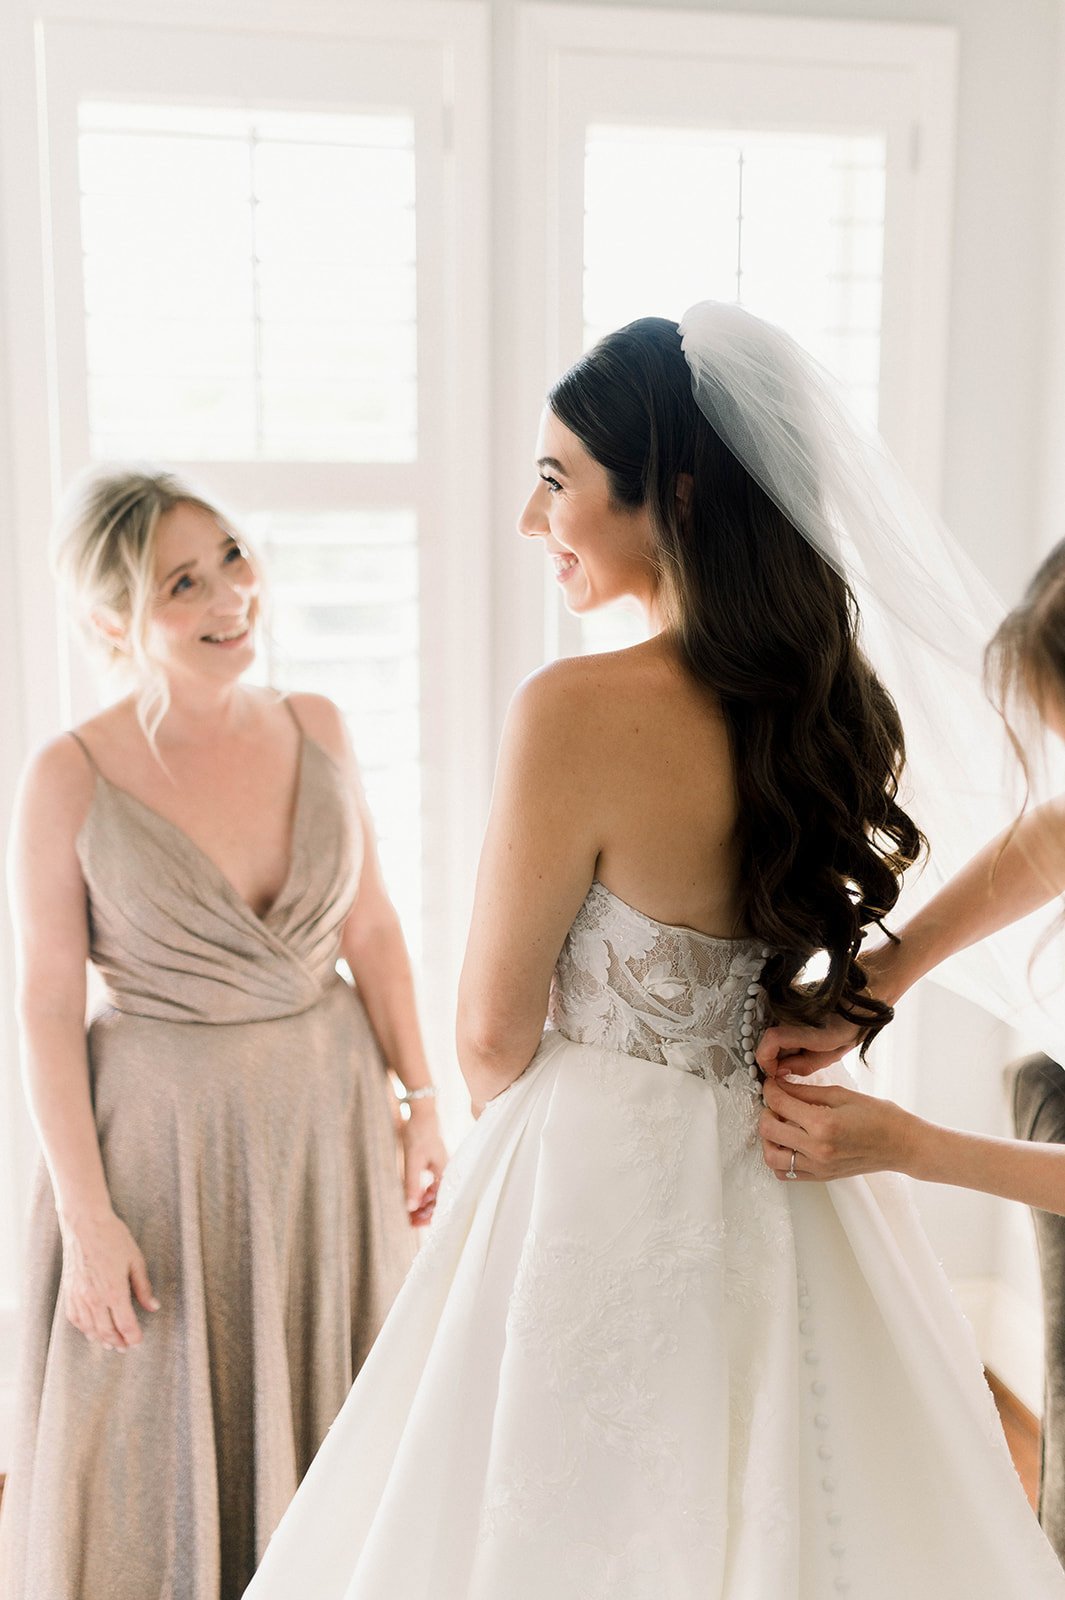 Bridesmaid watches jealously, feigning a smiles as the bride dons her wedding dress for her big day at Hart House in Vancouver BC